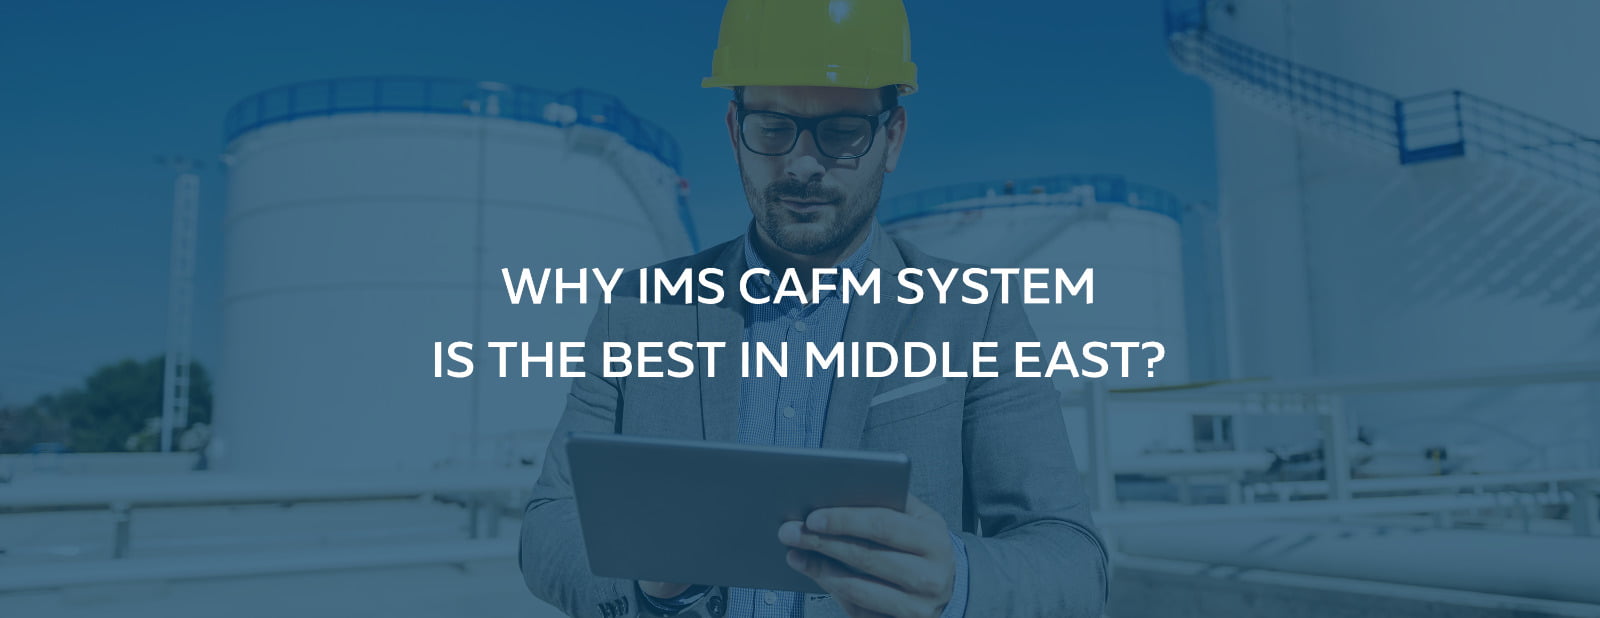 Why IMS CAFM System is The Best in Middle East